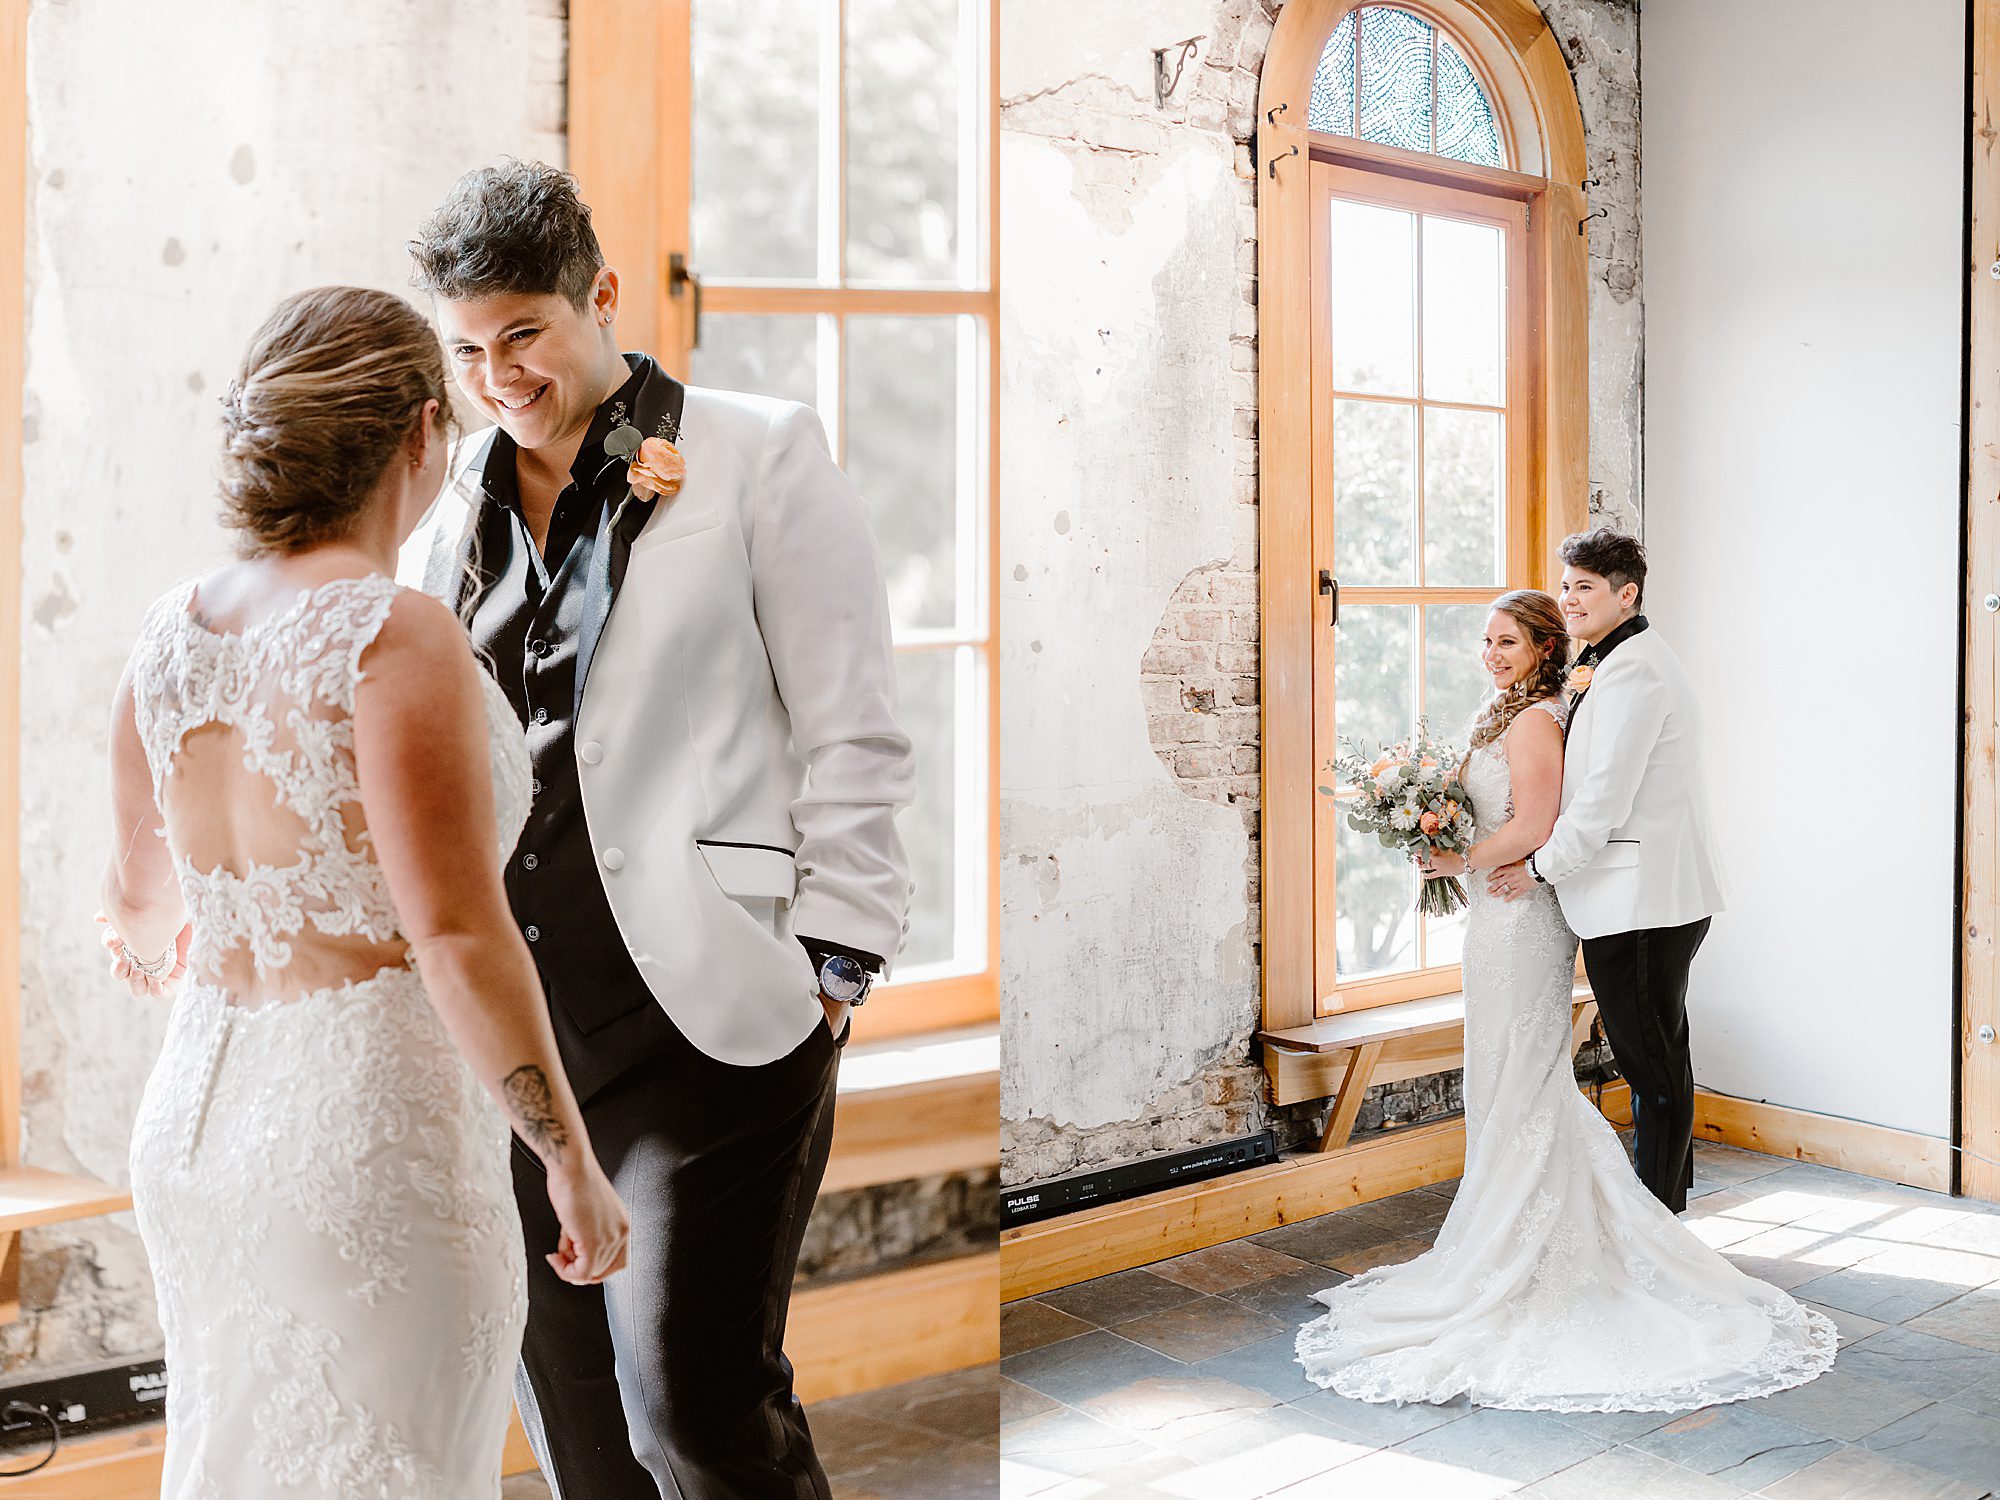 first look at couple photos for LGBTQ couple at intimate wedding